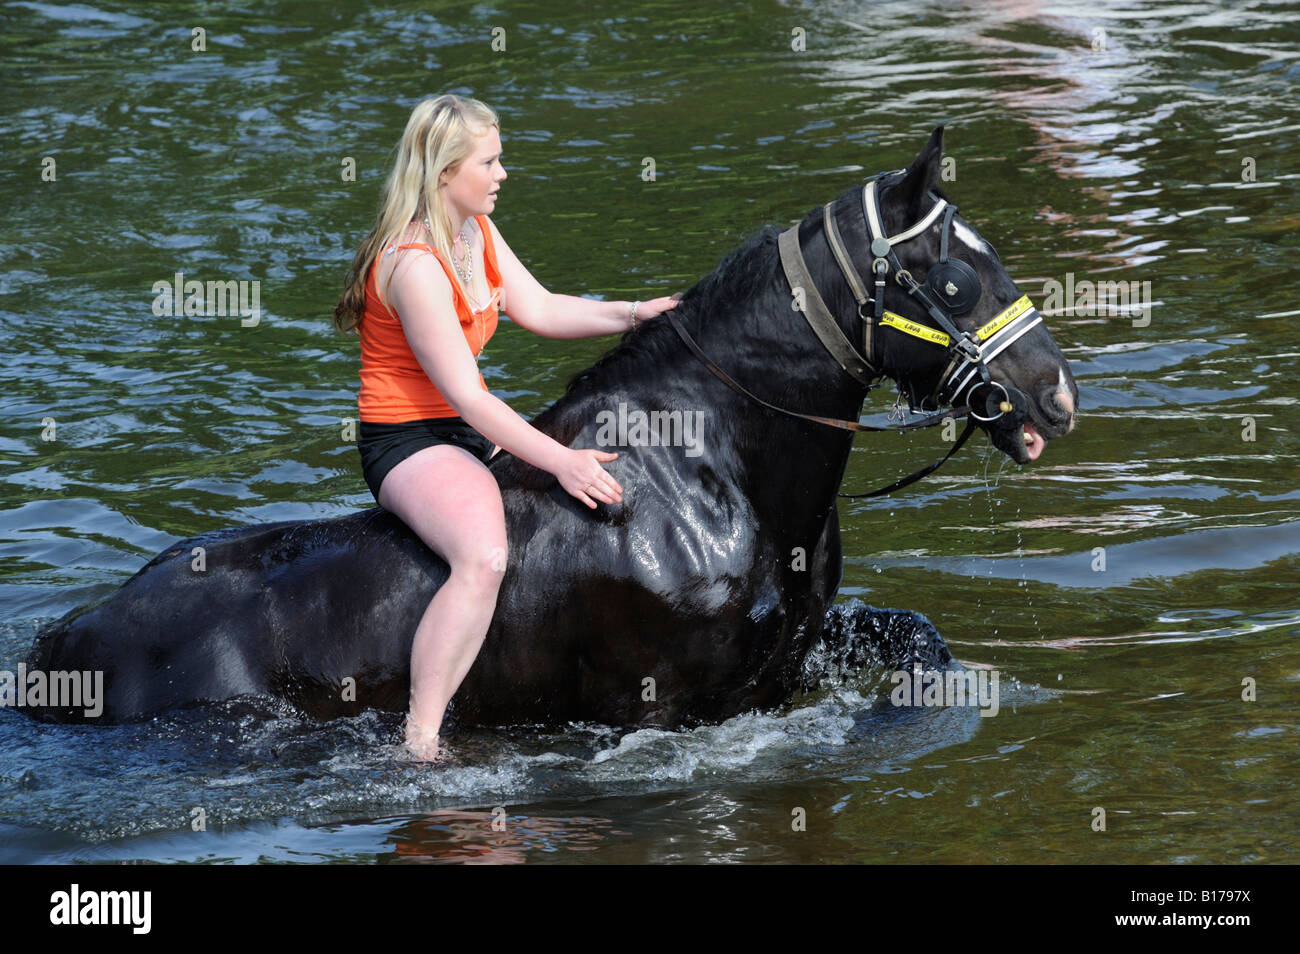 Gypsy traveller girl riding horse in River Eden. Appleby Horse Fair. Appleby-in-Westmorland, Cumbria, England, United Kingdom.. Stock Photo